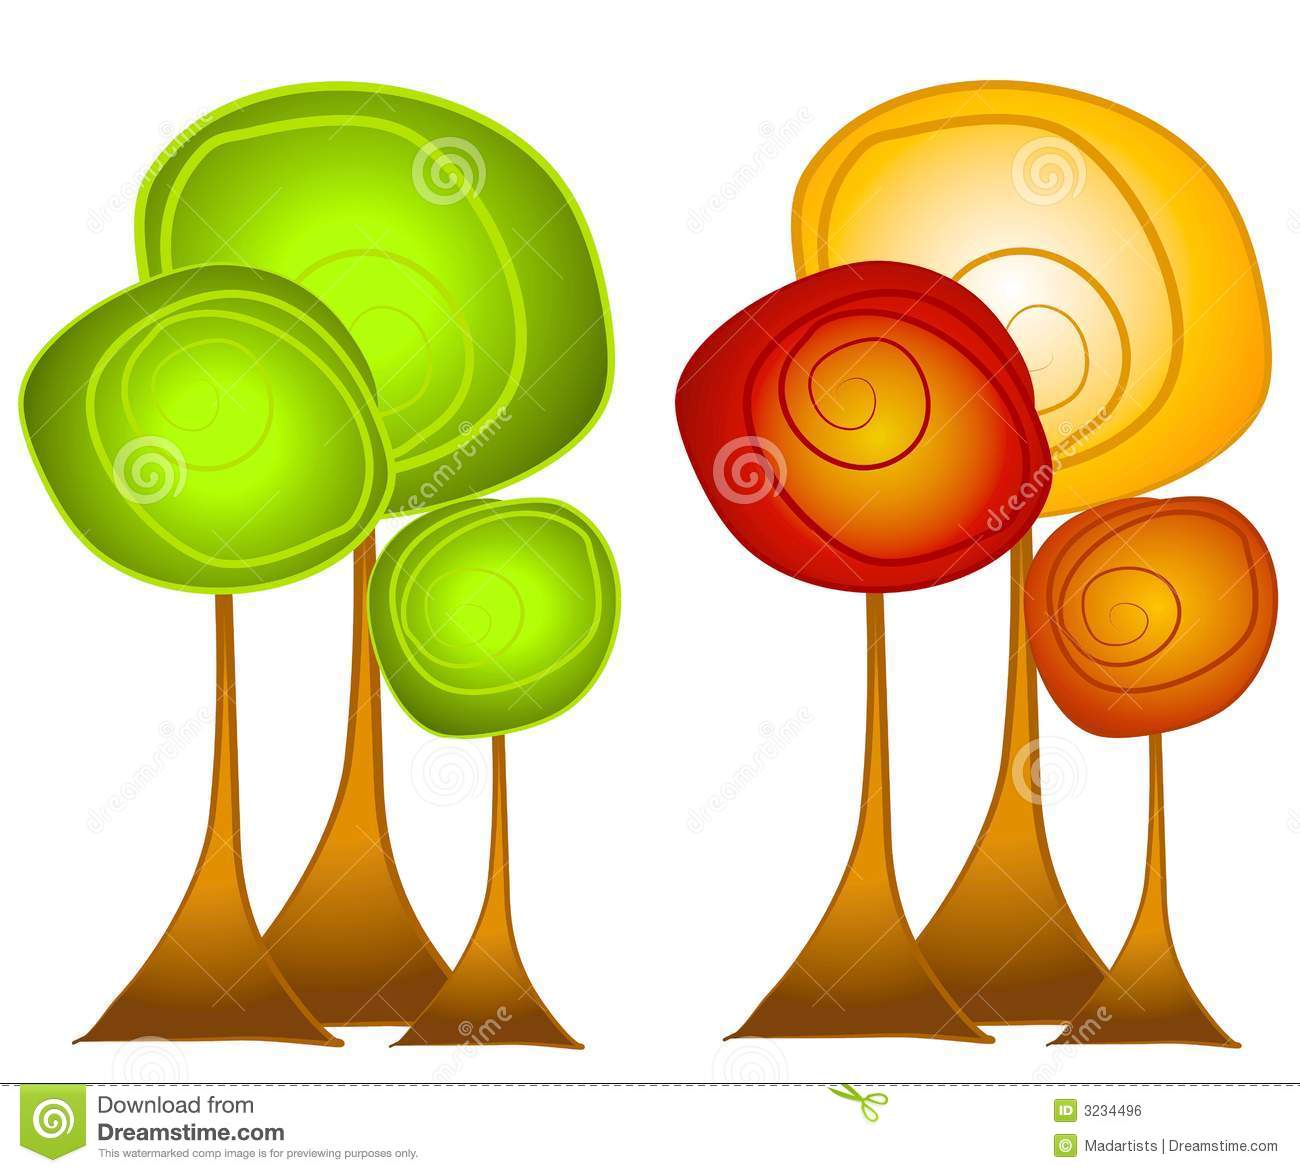 Clip Art Illustration Of Trees   Your Choice Of Fall Or Summer Theme